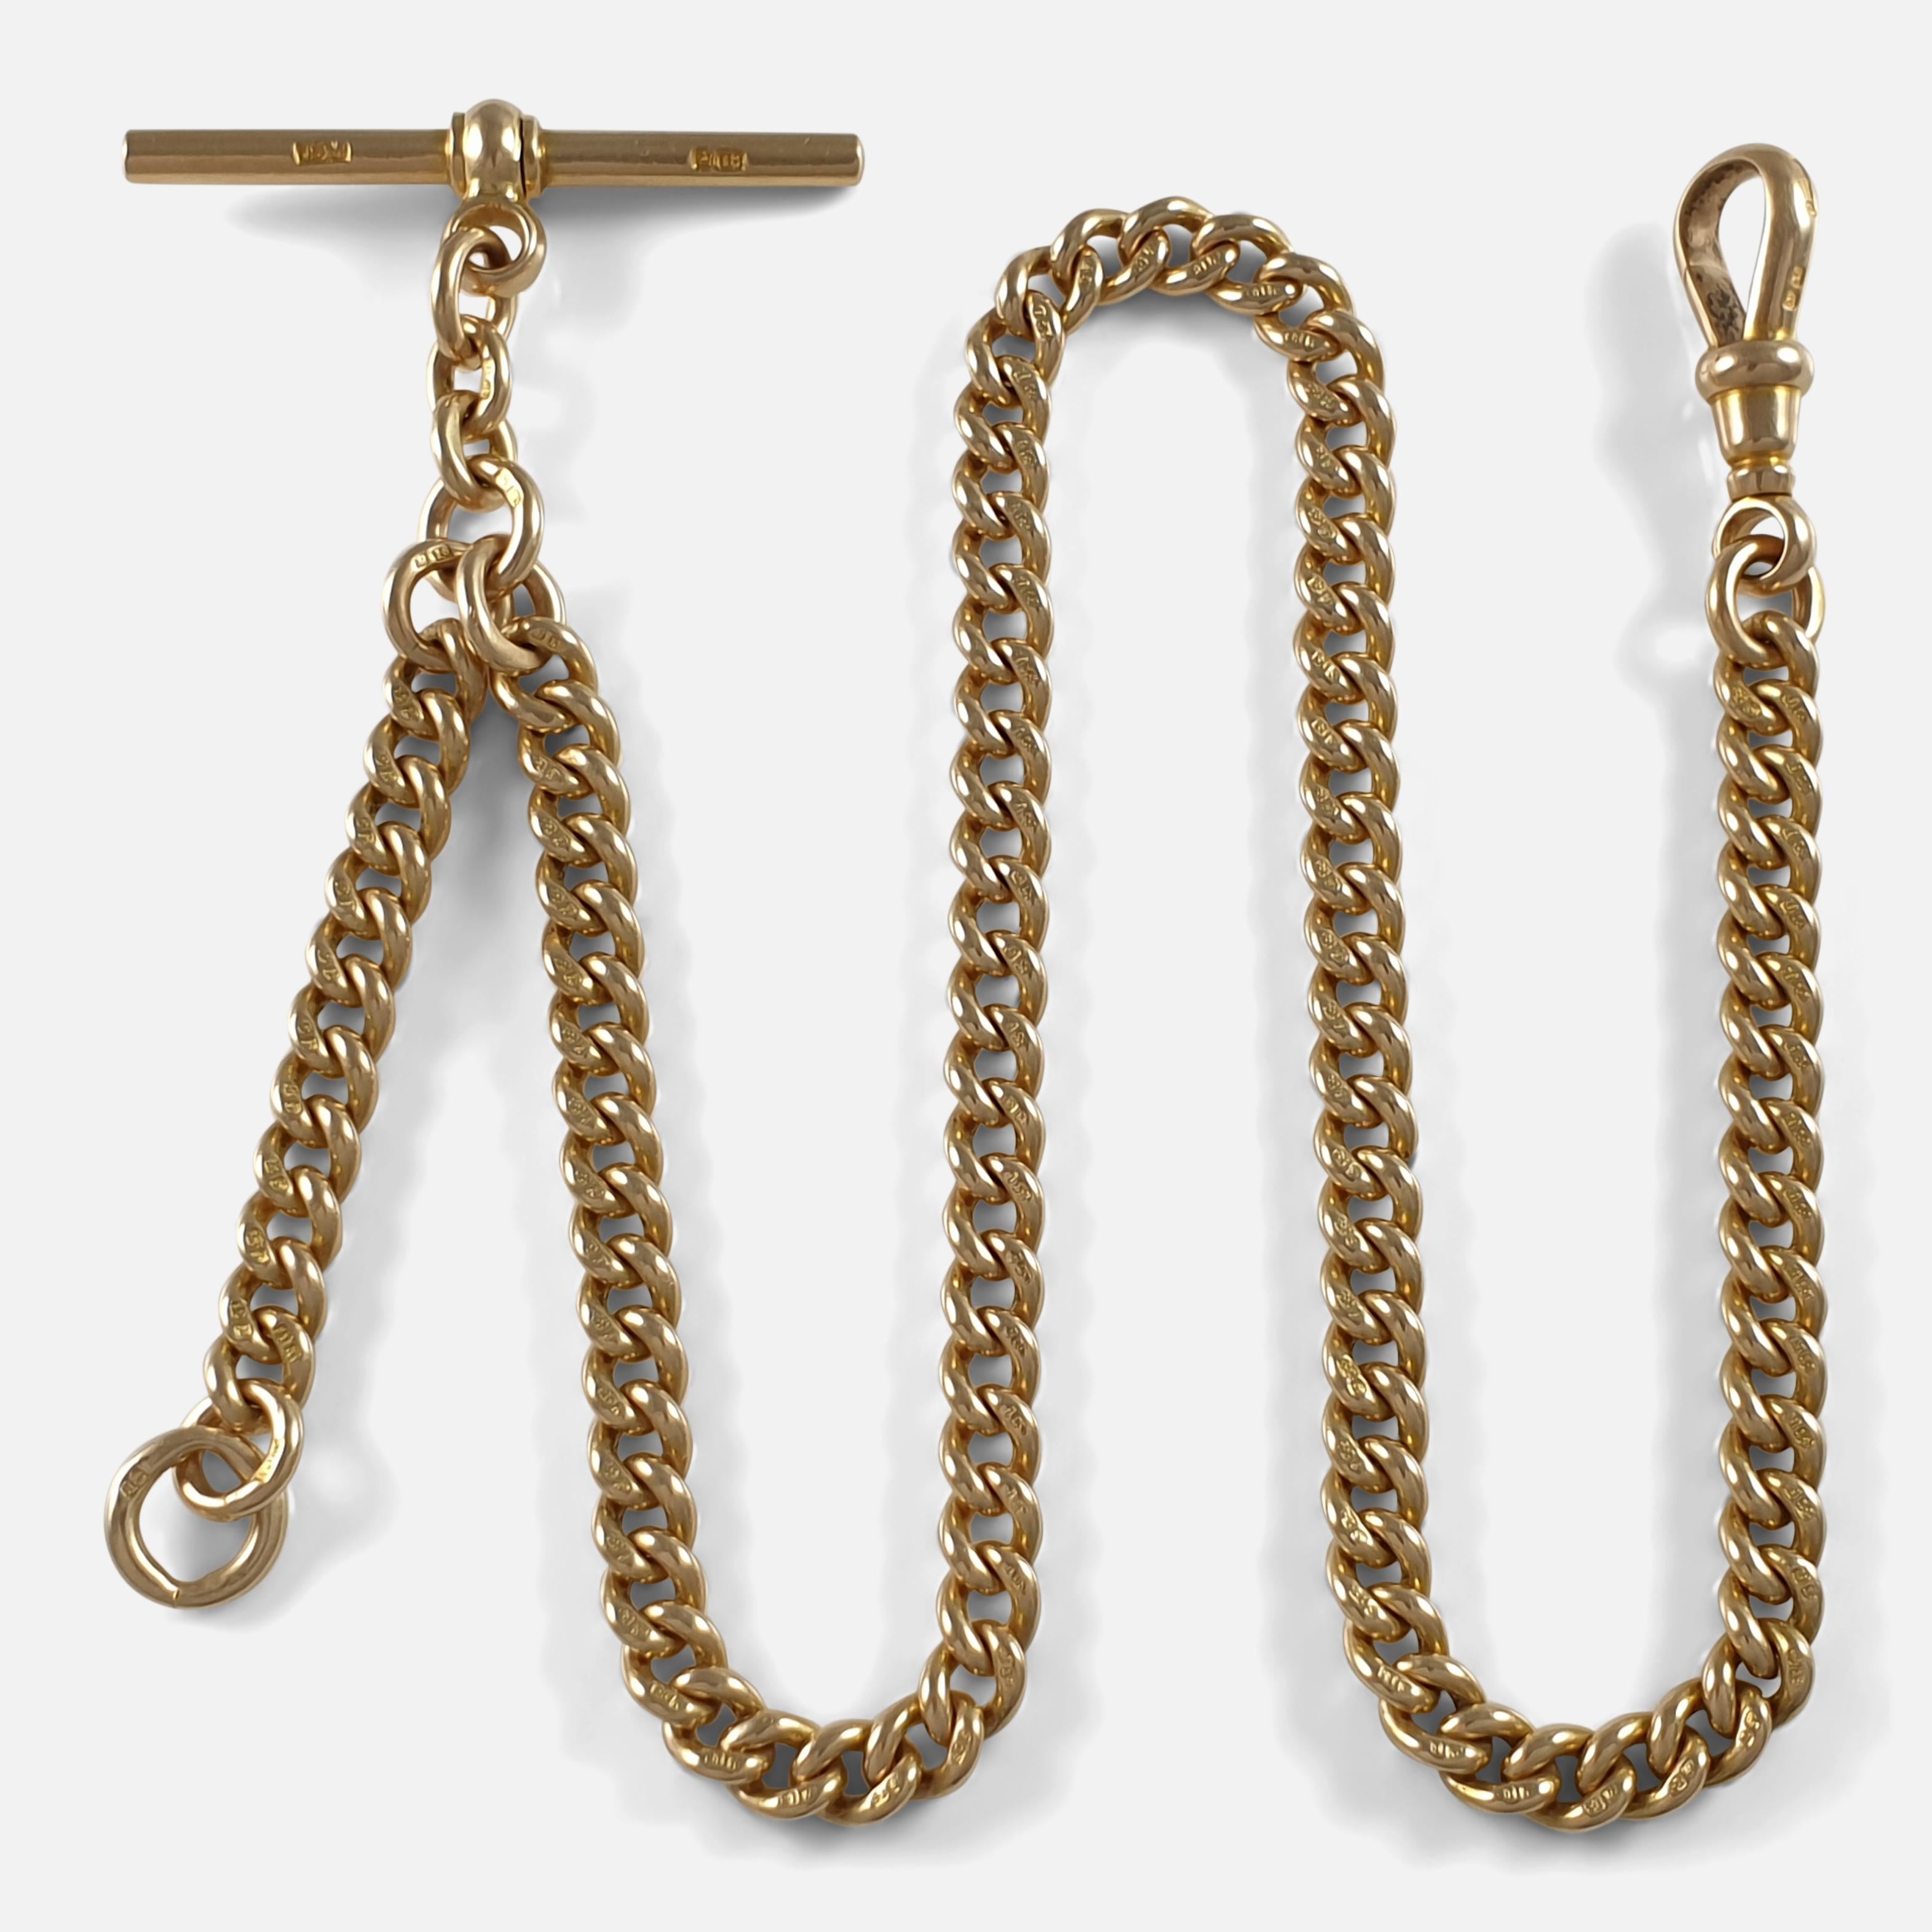 An antique Victorian 18 carat yellow gold albert watch chain, and T-bar; Birmingham, 1884. 

Date: - 1884.

Engraving: - N/A.

Measurement: - The watch chain measures approximately 15 1/8 inches (38.4cm).  The chain links are 0.5cm wide.

Weight: -